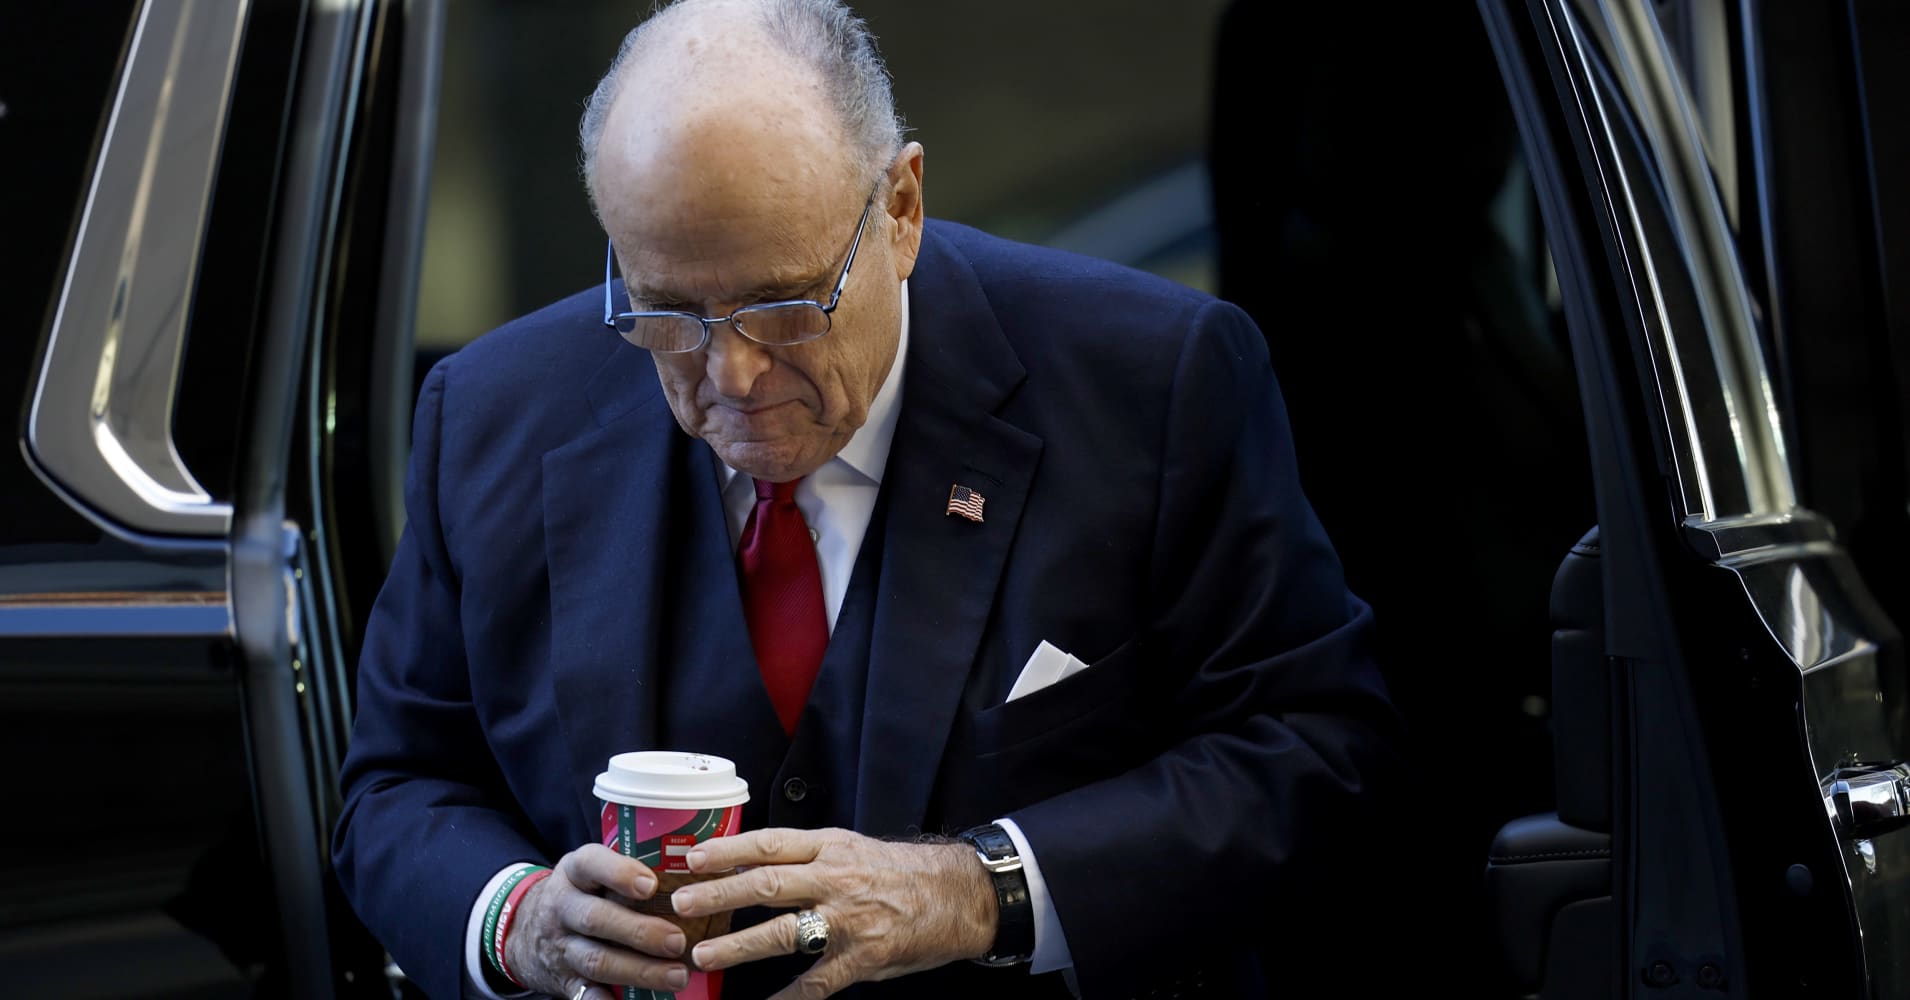 Rudy Giuliani, the former personal lawyer for former U.S. President Donald Trump, arrives at the E. Barrett Prettyman U.S. District Courthouse in Washington, D.C., on Dec. 15, 2023.